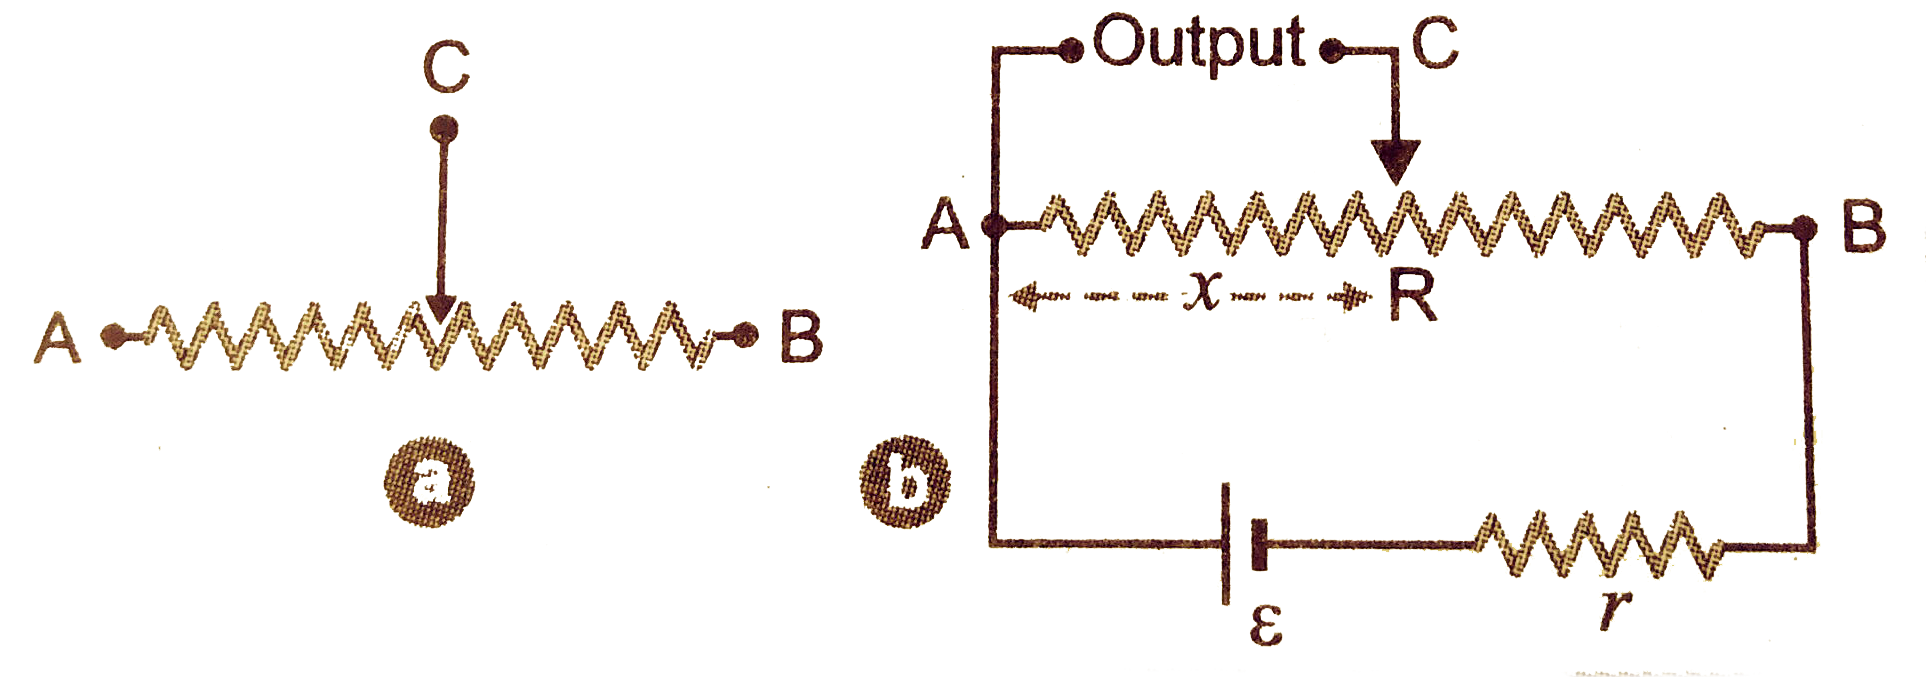 A schematic rheostat is shown in figure. Connect a battery to it so that it acts as a potential divider. Also show the output terminals.